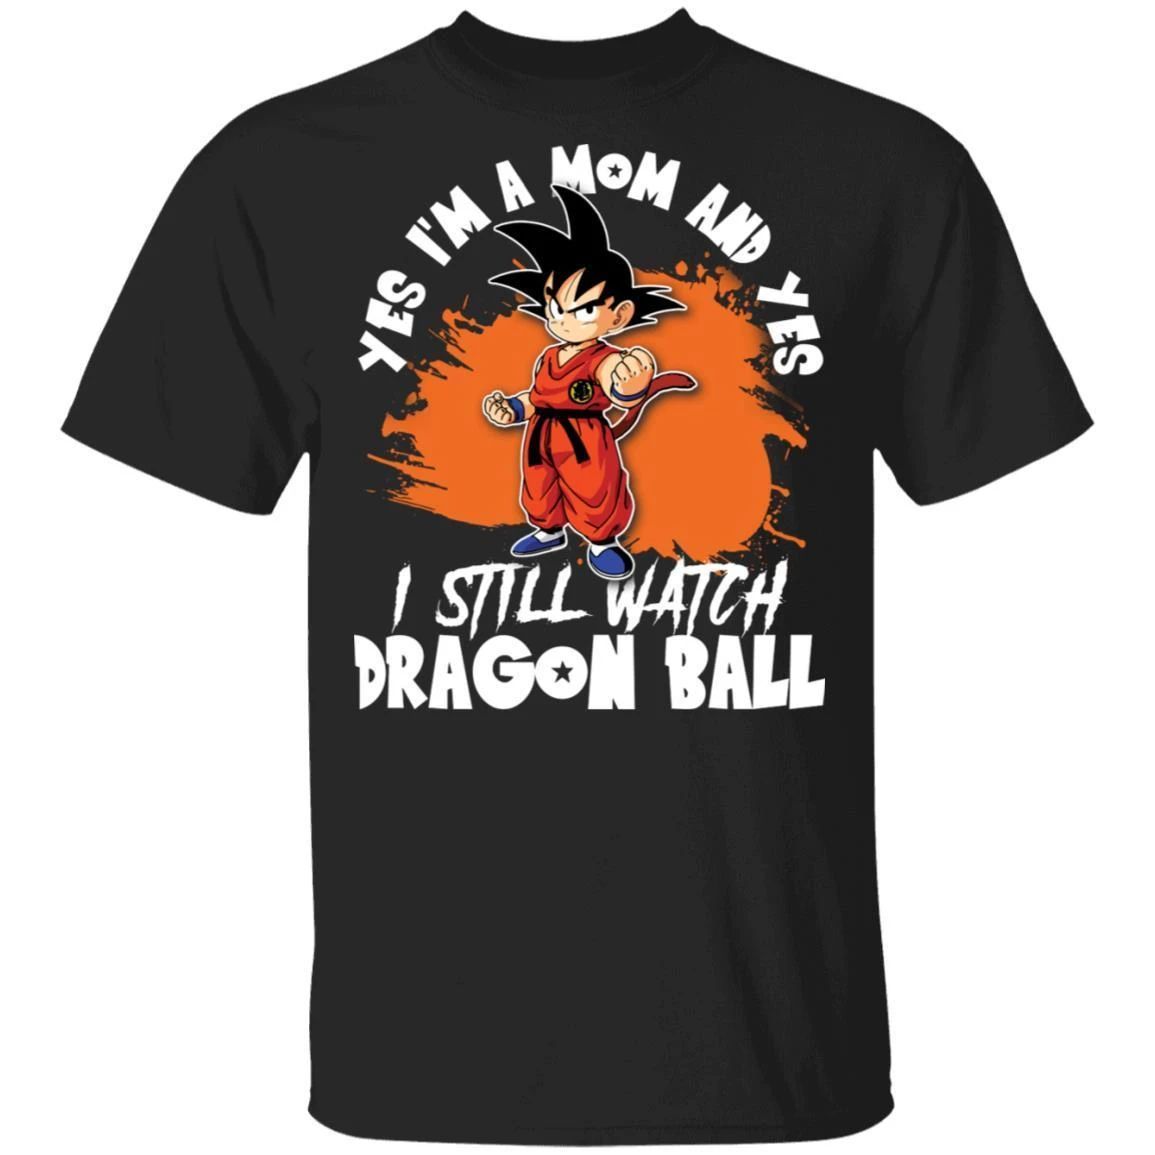 Yes I’m A Mom And Yes I Still Watch Dragon Ball Shirt Son Goku Tee